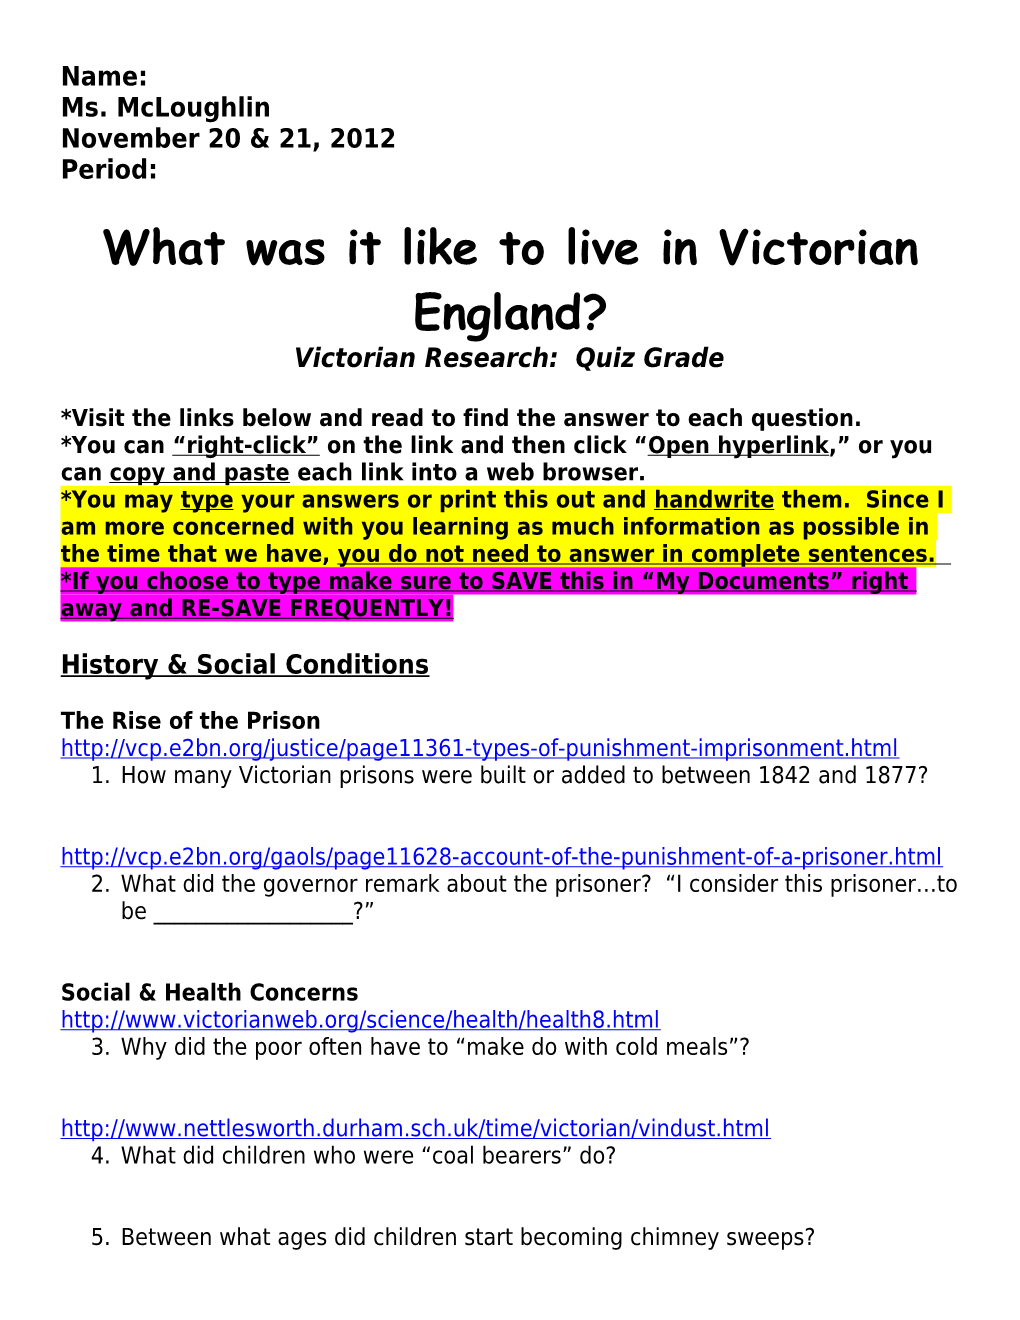 What Was It Like to Live in Victorian England?